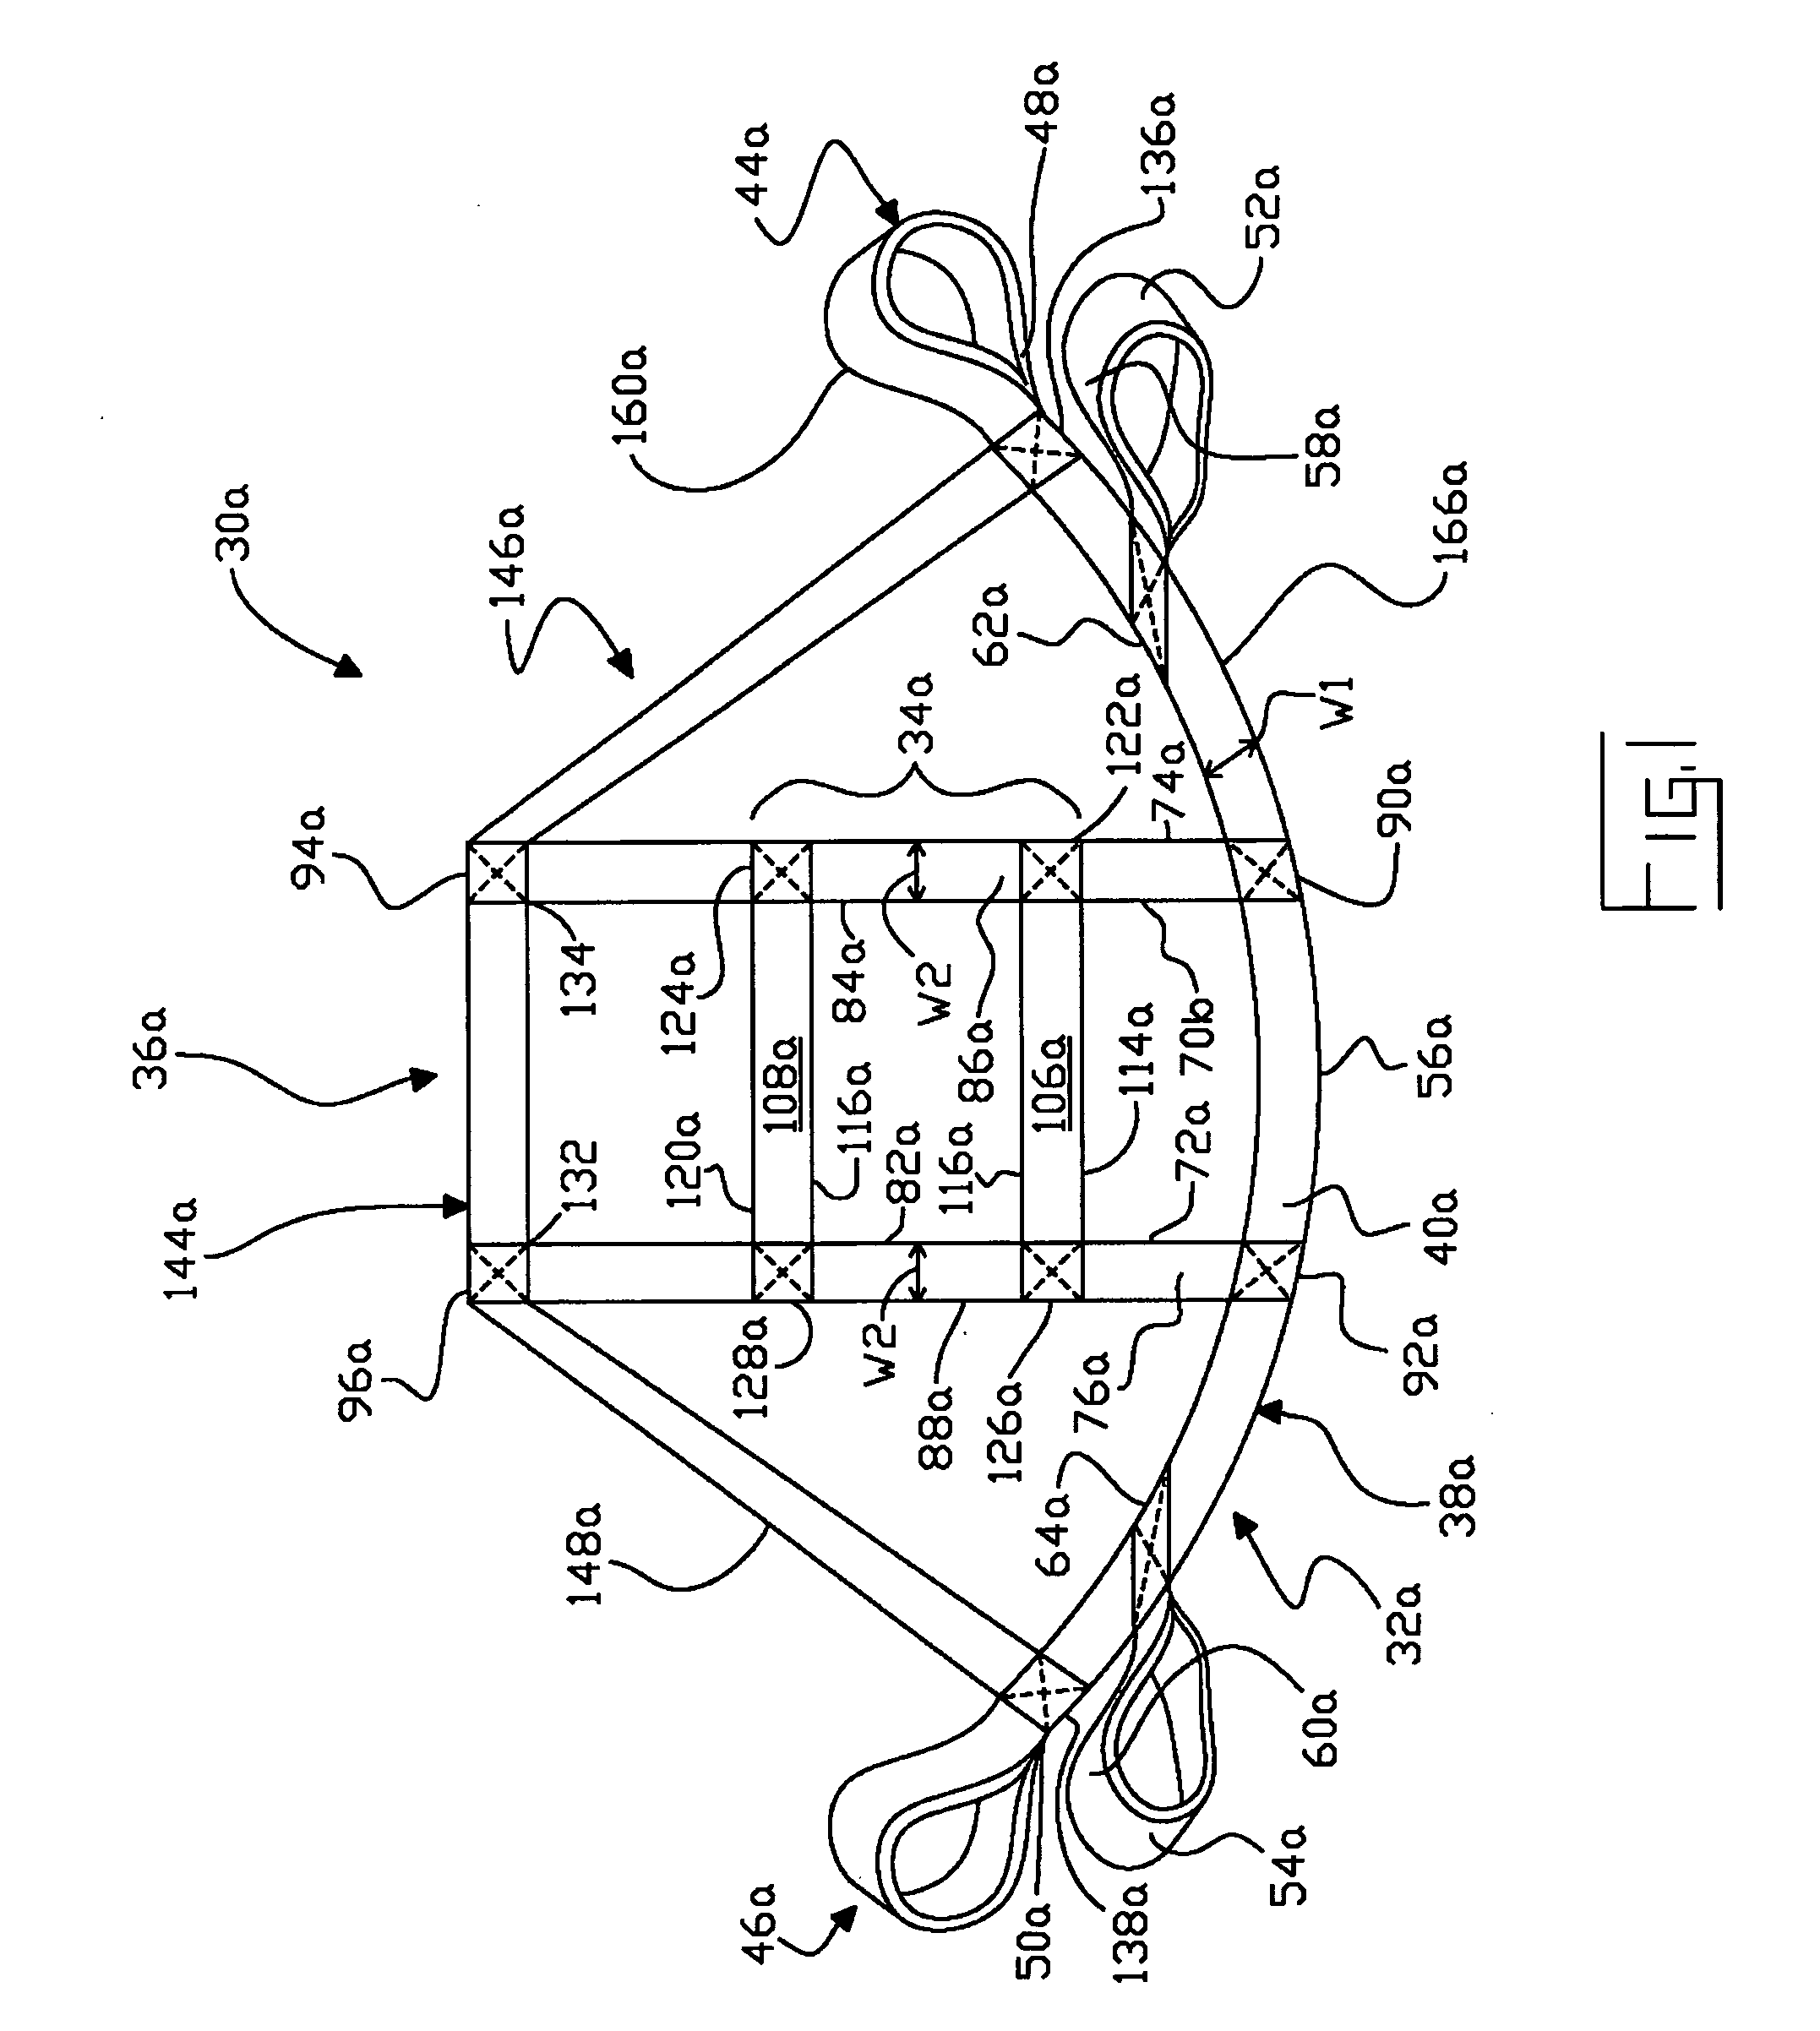 Sling for extracting and transporting people